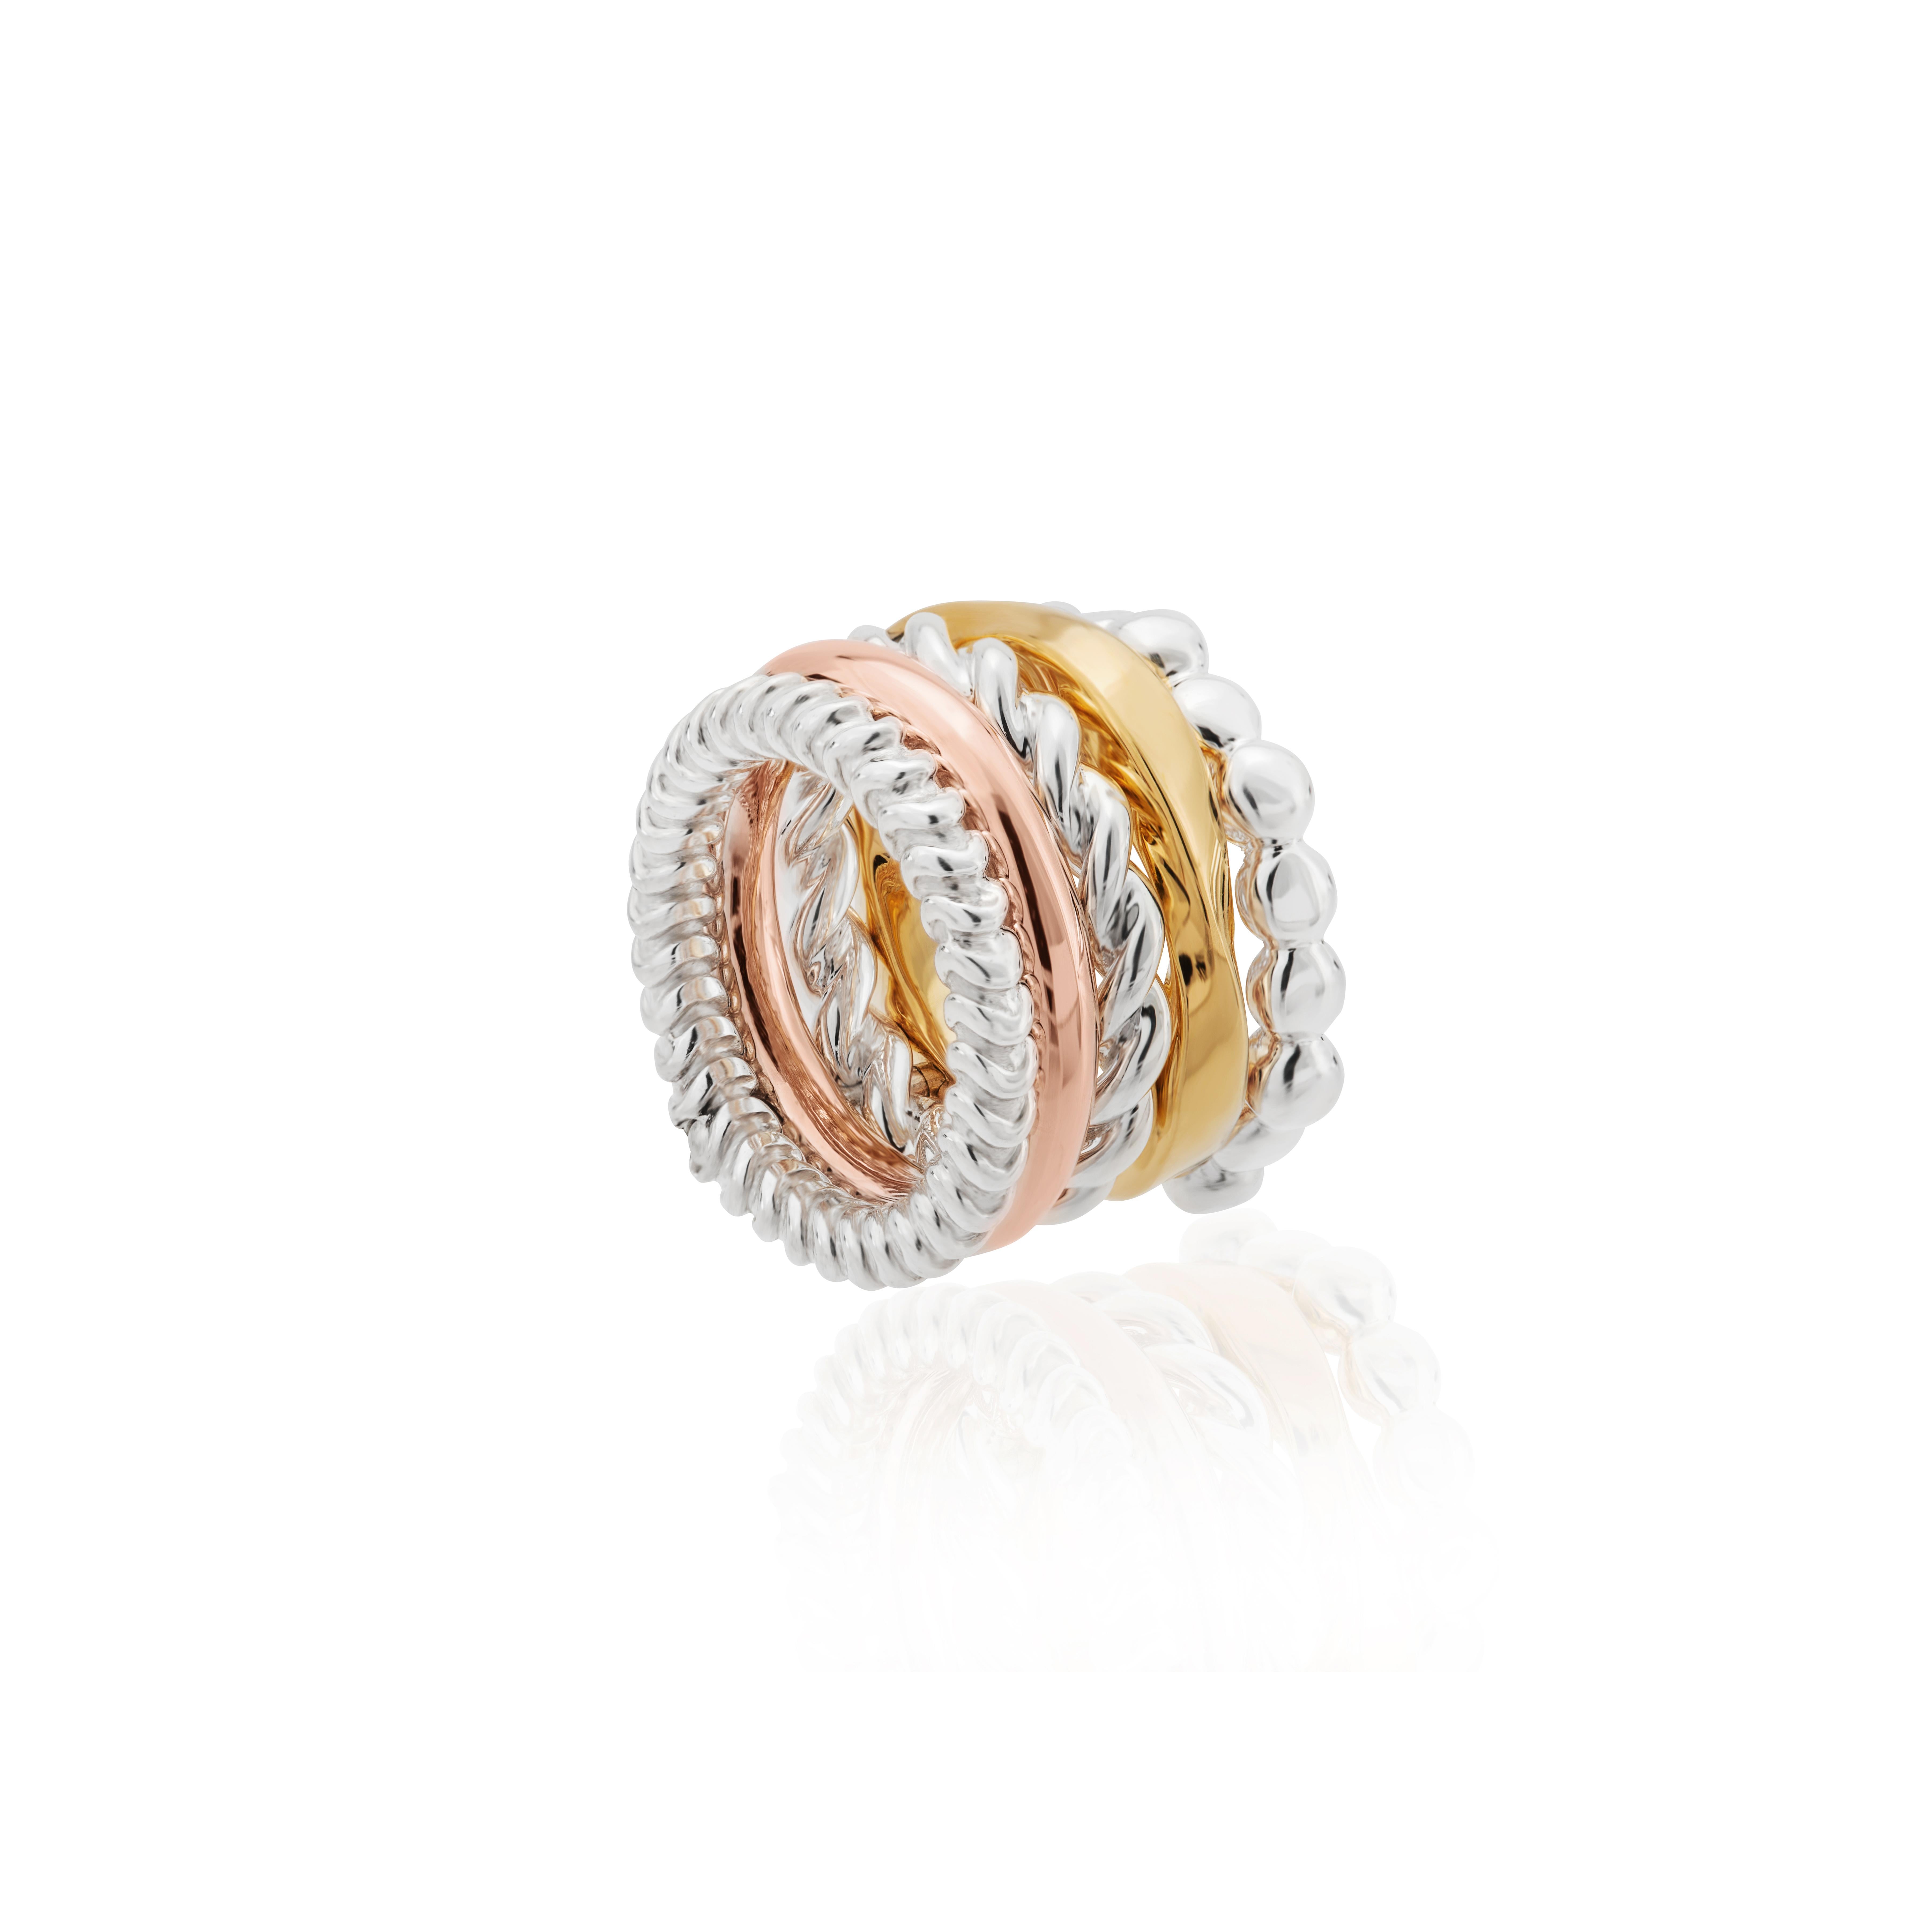 Fun and dynamism are brought together in this stunning  ring made up of five completely unique rings handmade in sterling silver, 23 karat vermeil & rose gold.

A stunning tribute to the churumbelas created by Pedro Leites, this new version of